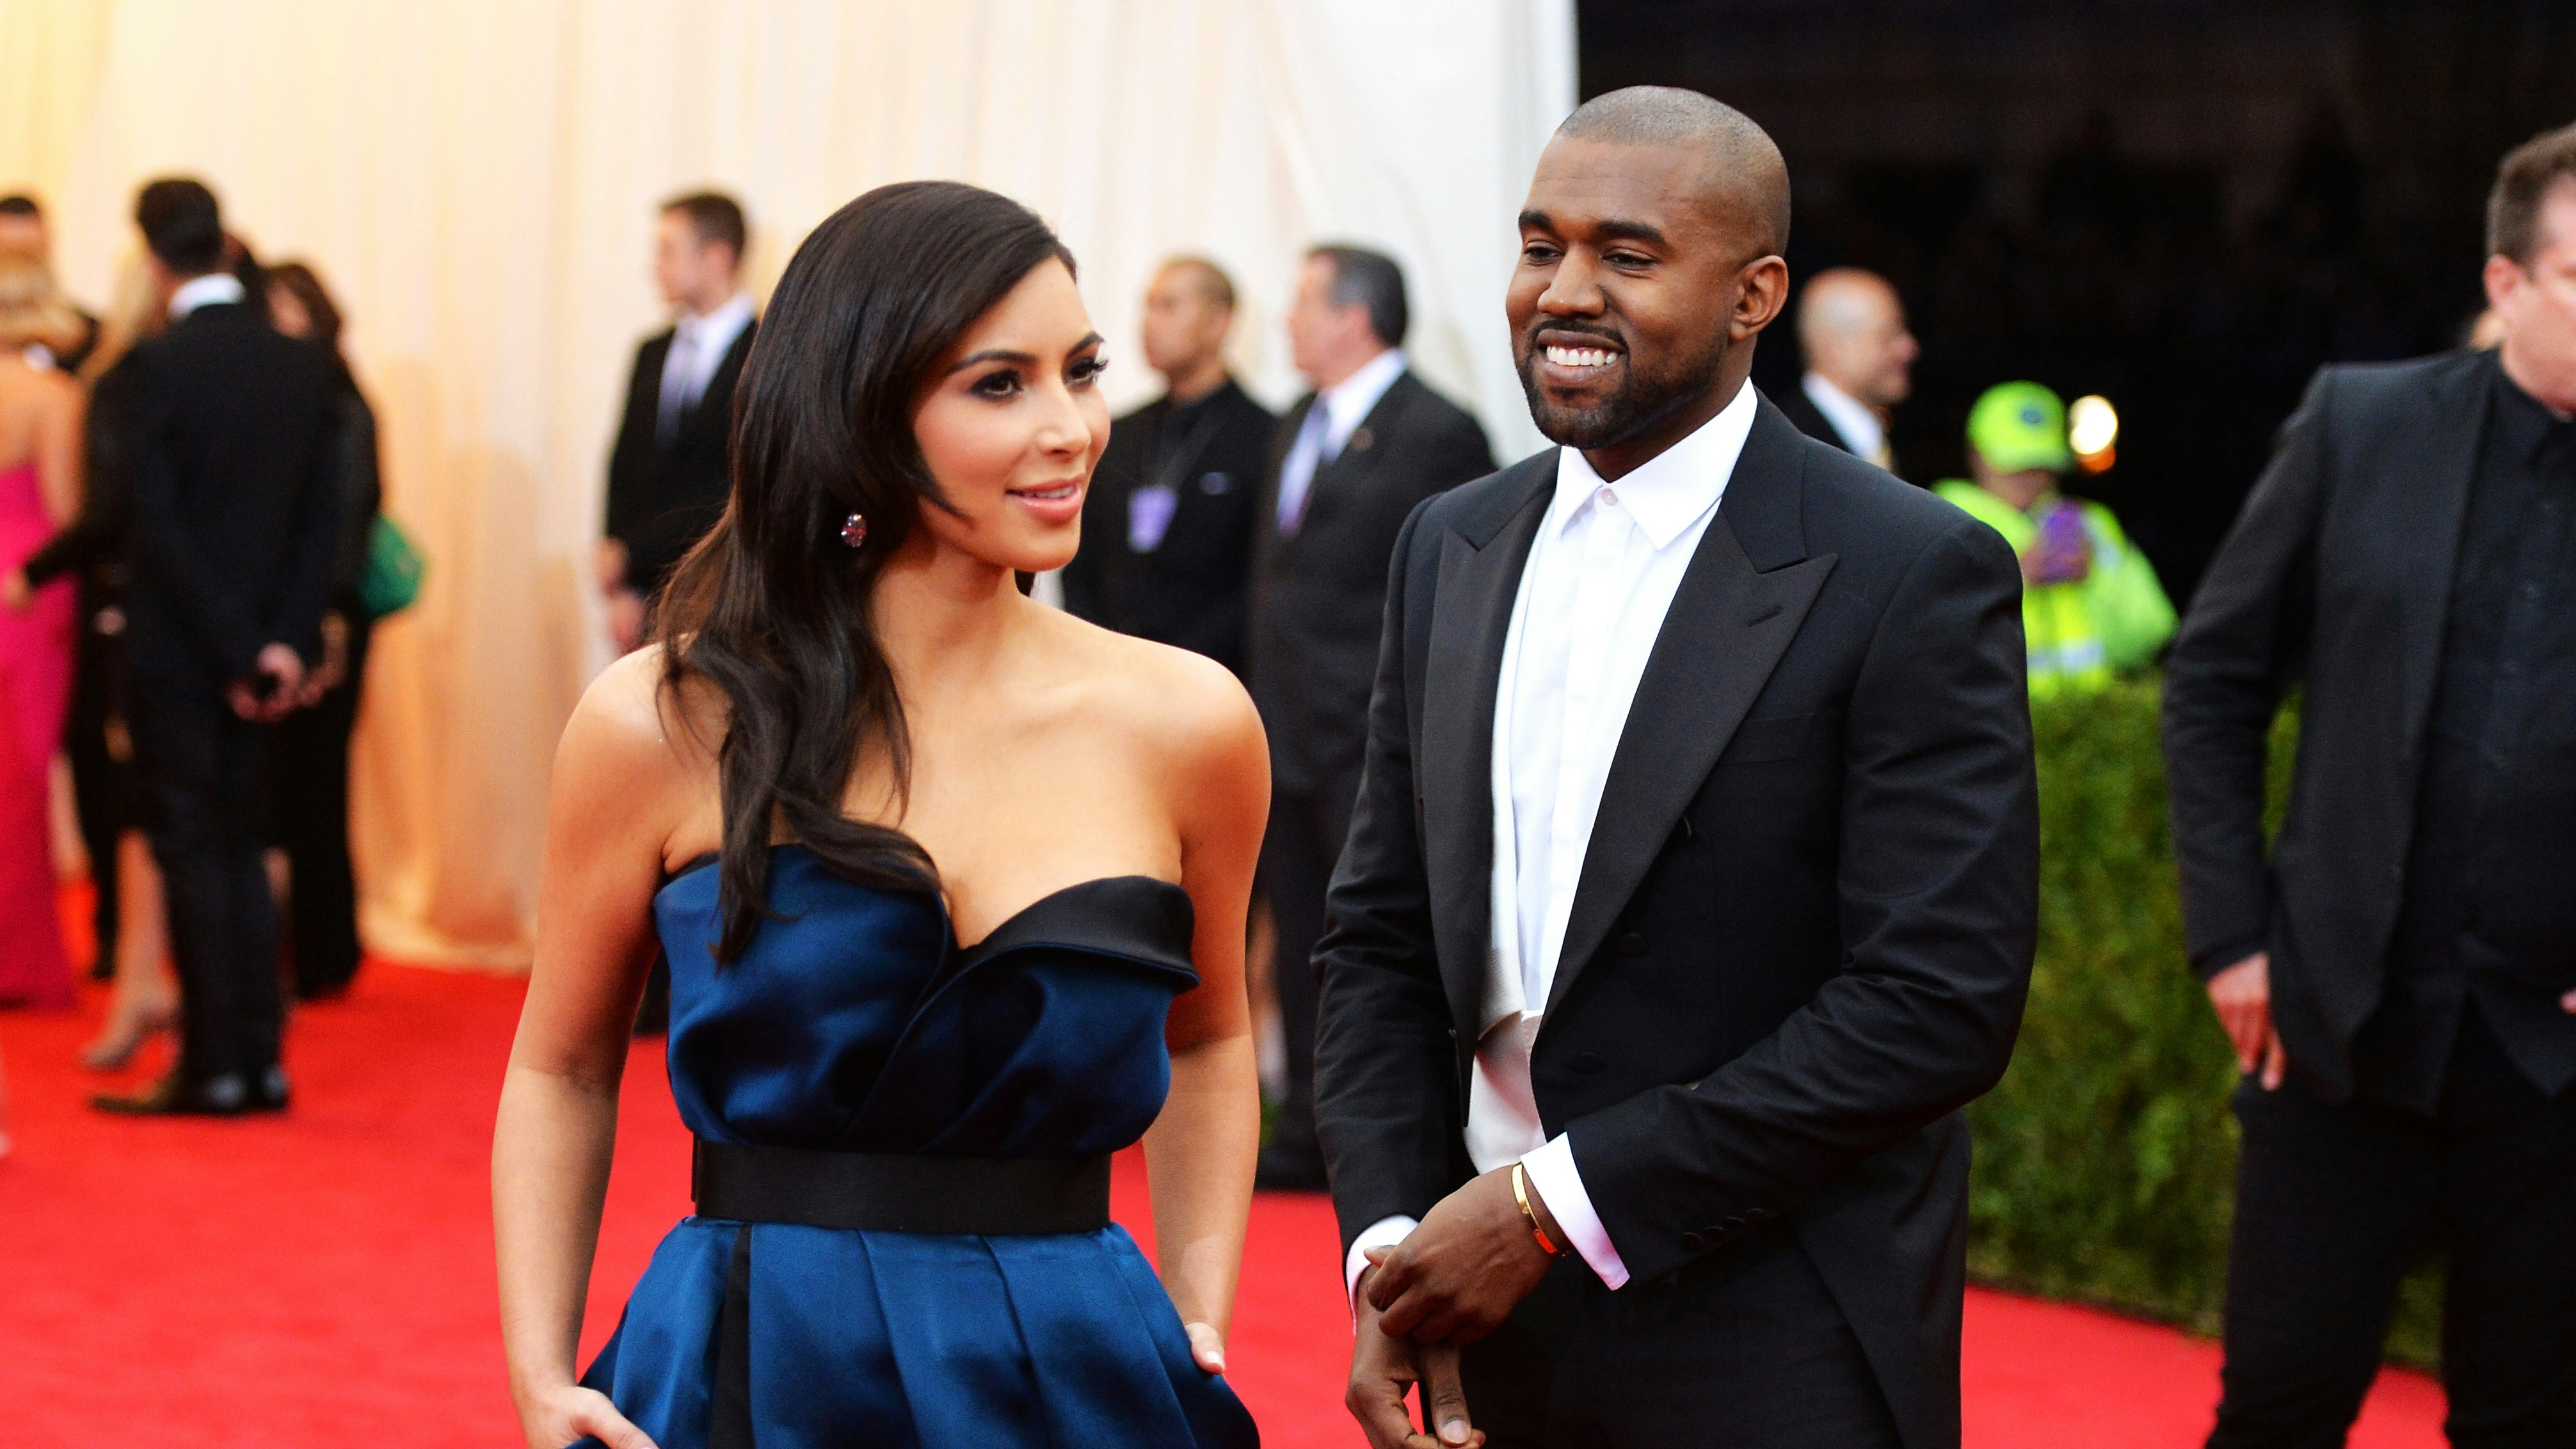 Kanye West Gifted Kim Kardashian £800k In Charity Donations For Her 39th Birthday